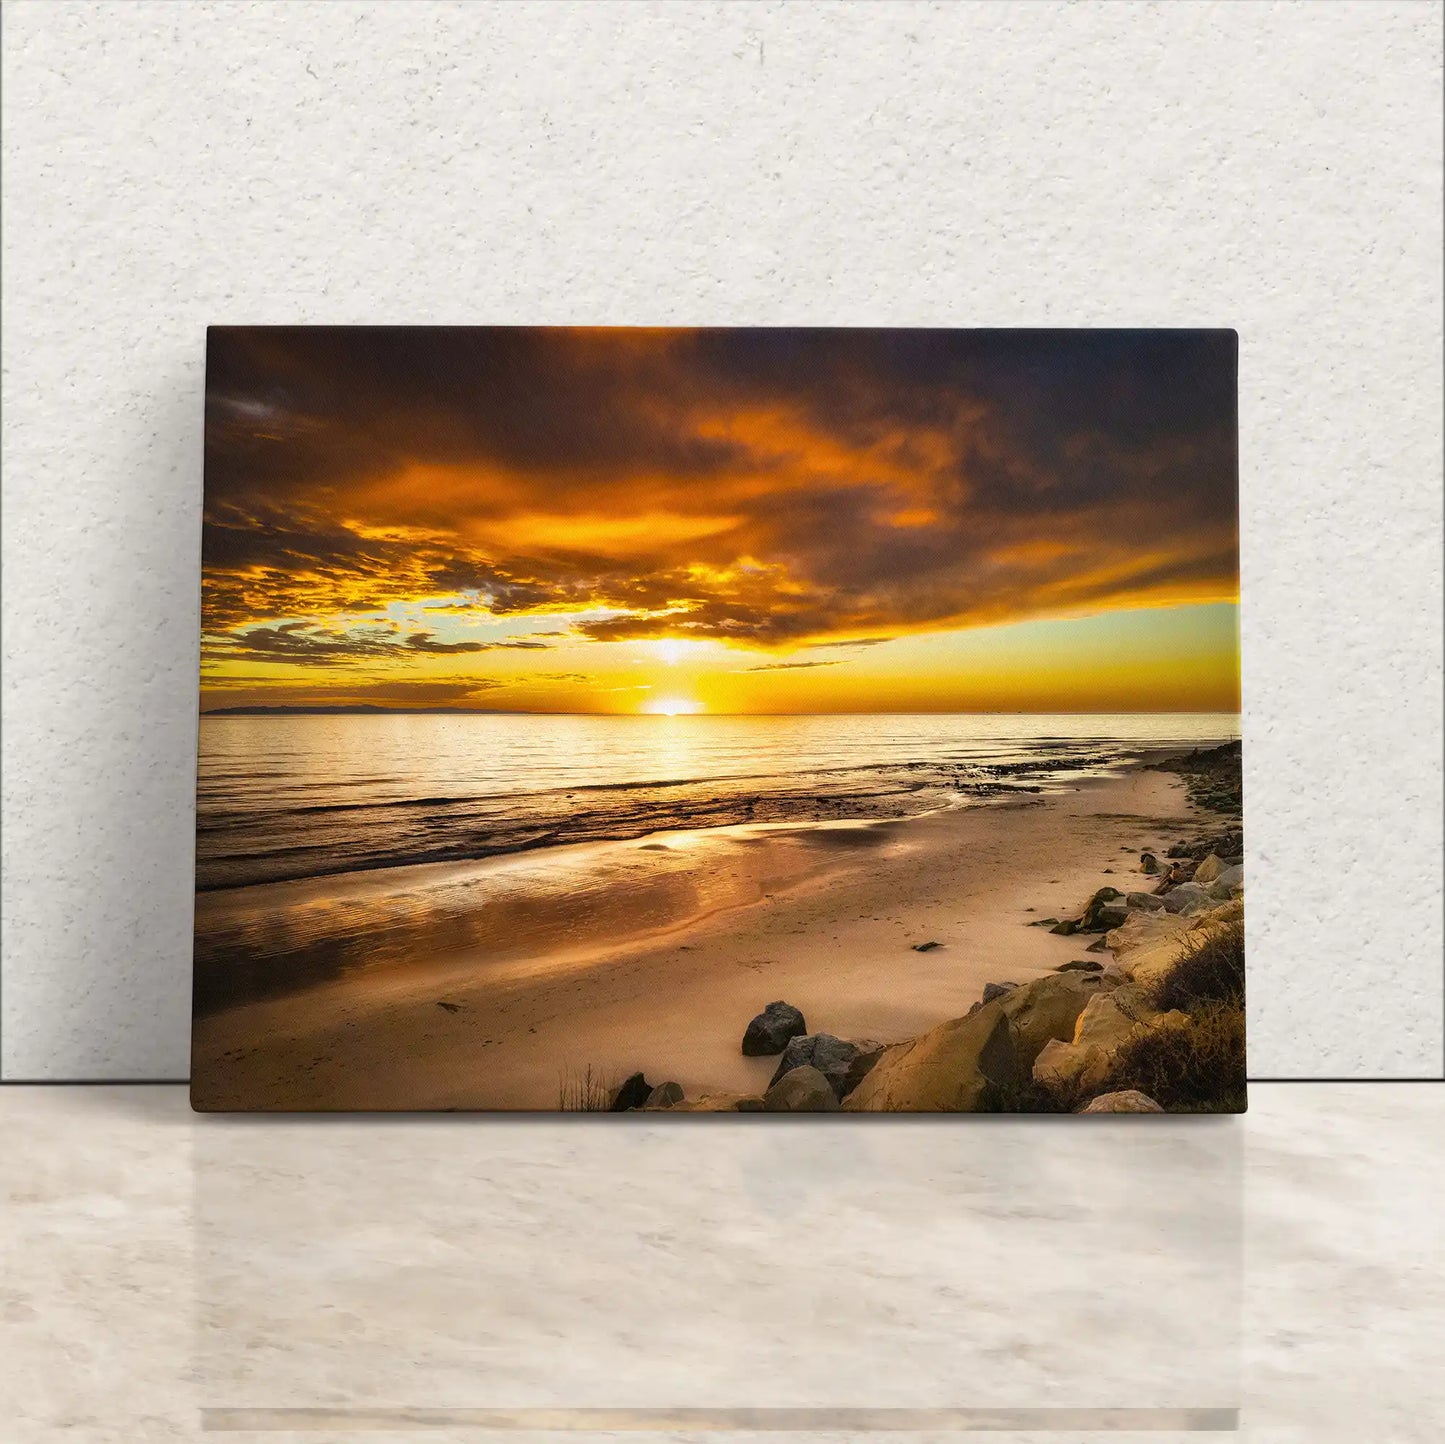 Canvas print leaning against a wall, capturing the majestic sunset at Hobson Beach, with radiant skies and a tranquil sea, inviting a sense of calm.